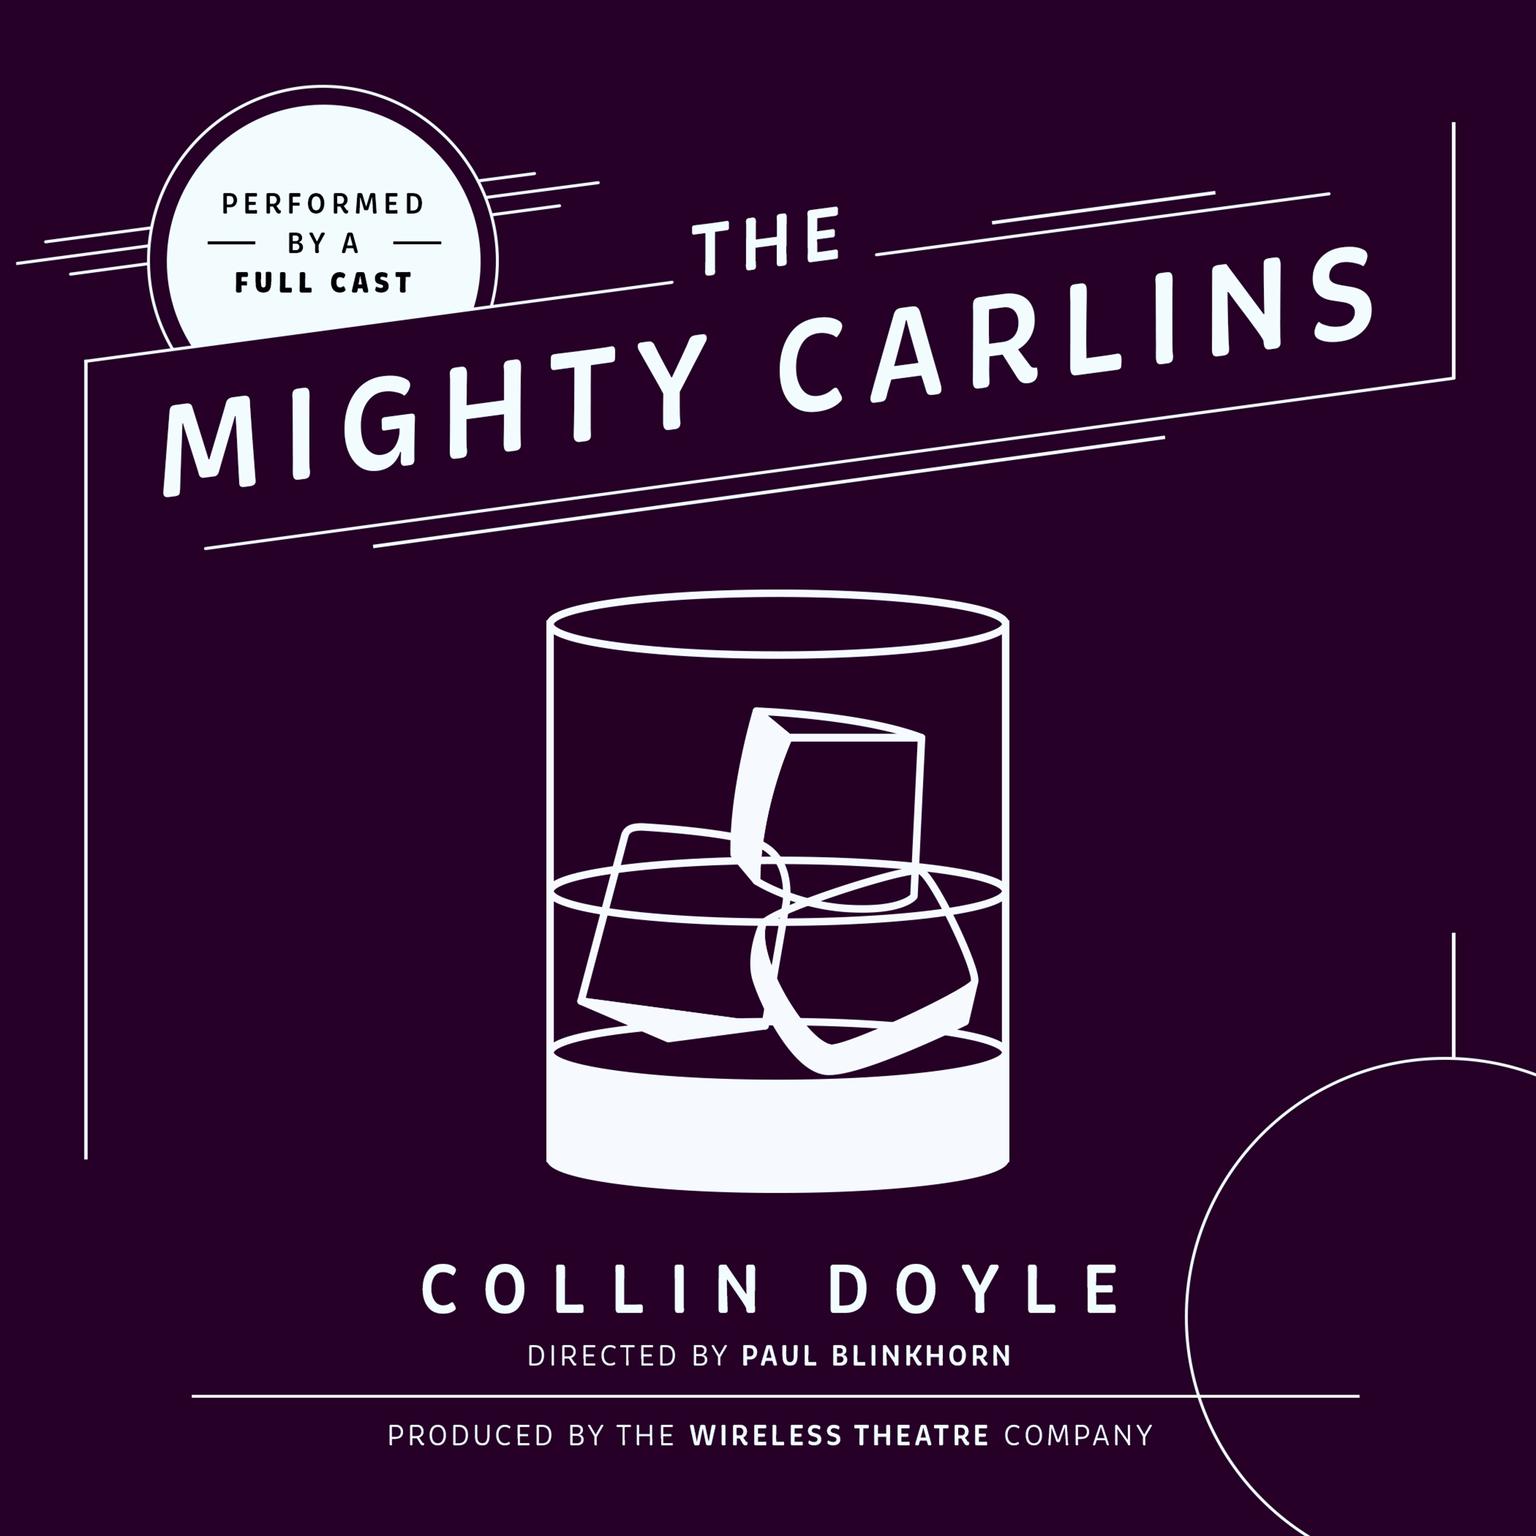 The Mighty Carlins Audiobook, by Collin Doyle